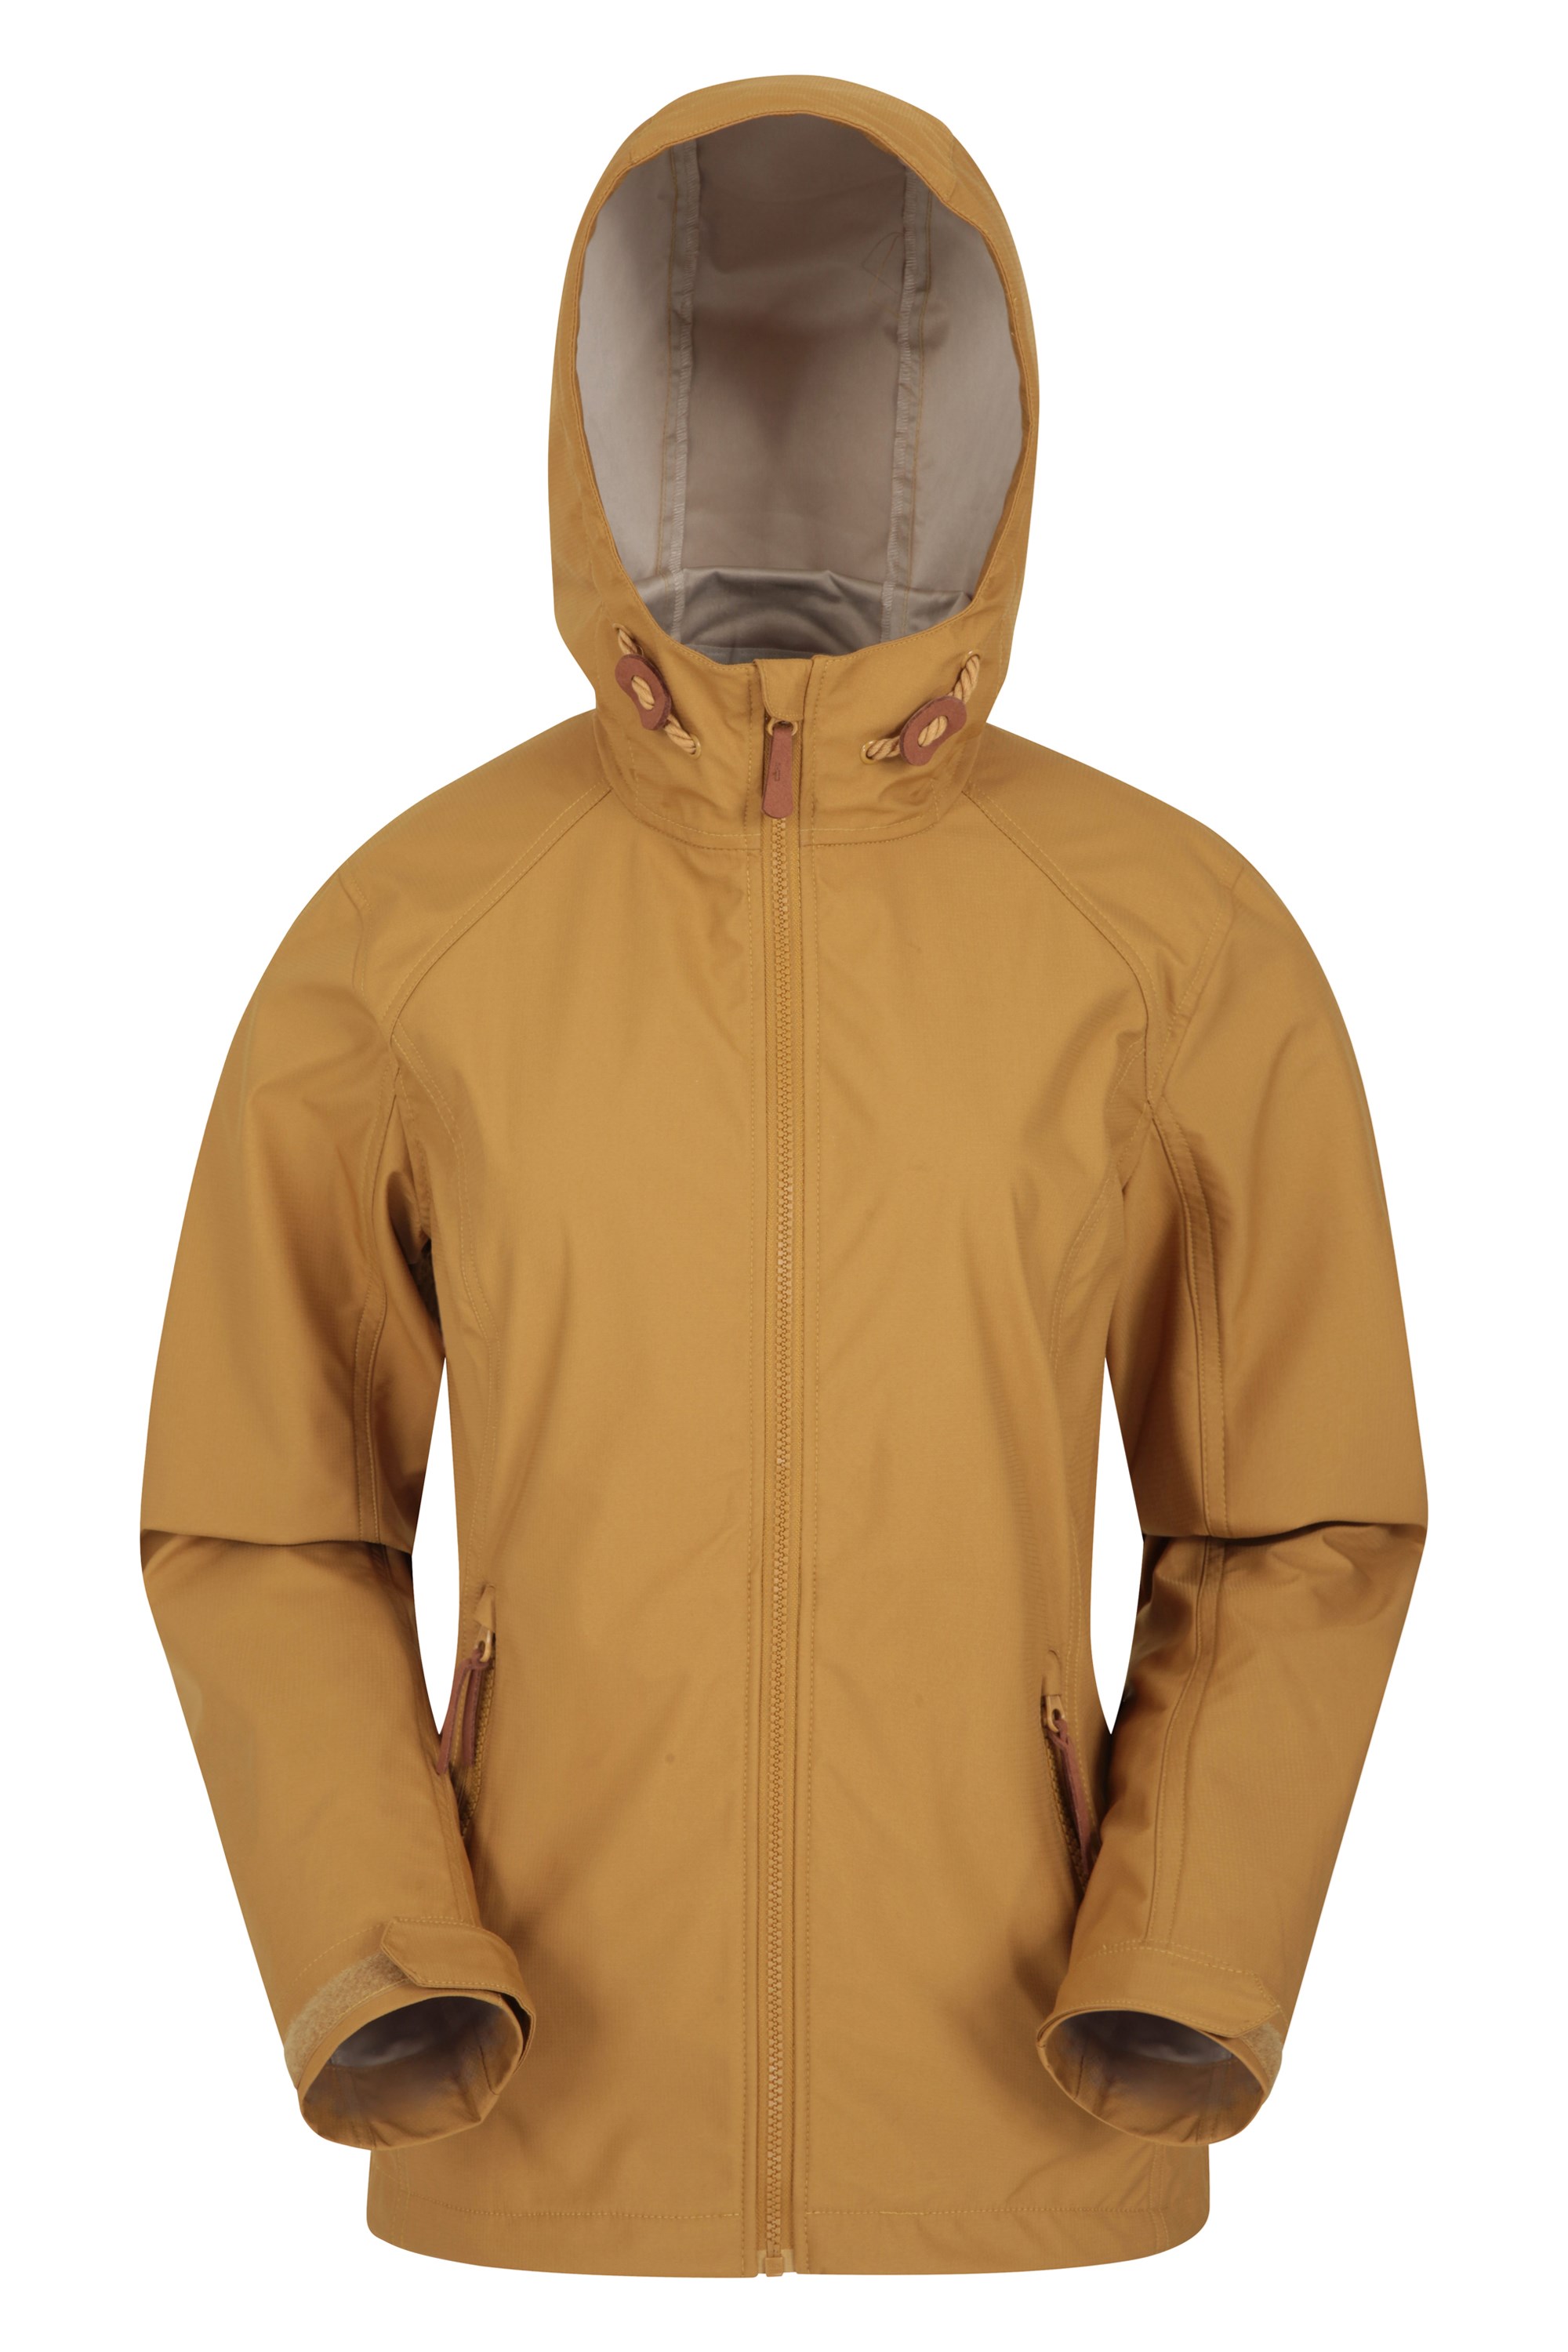 for Spring Mountain Warehouse Iona Womens Water Resistant Softshell Jacket Lightweight Breathable